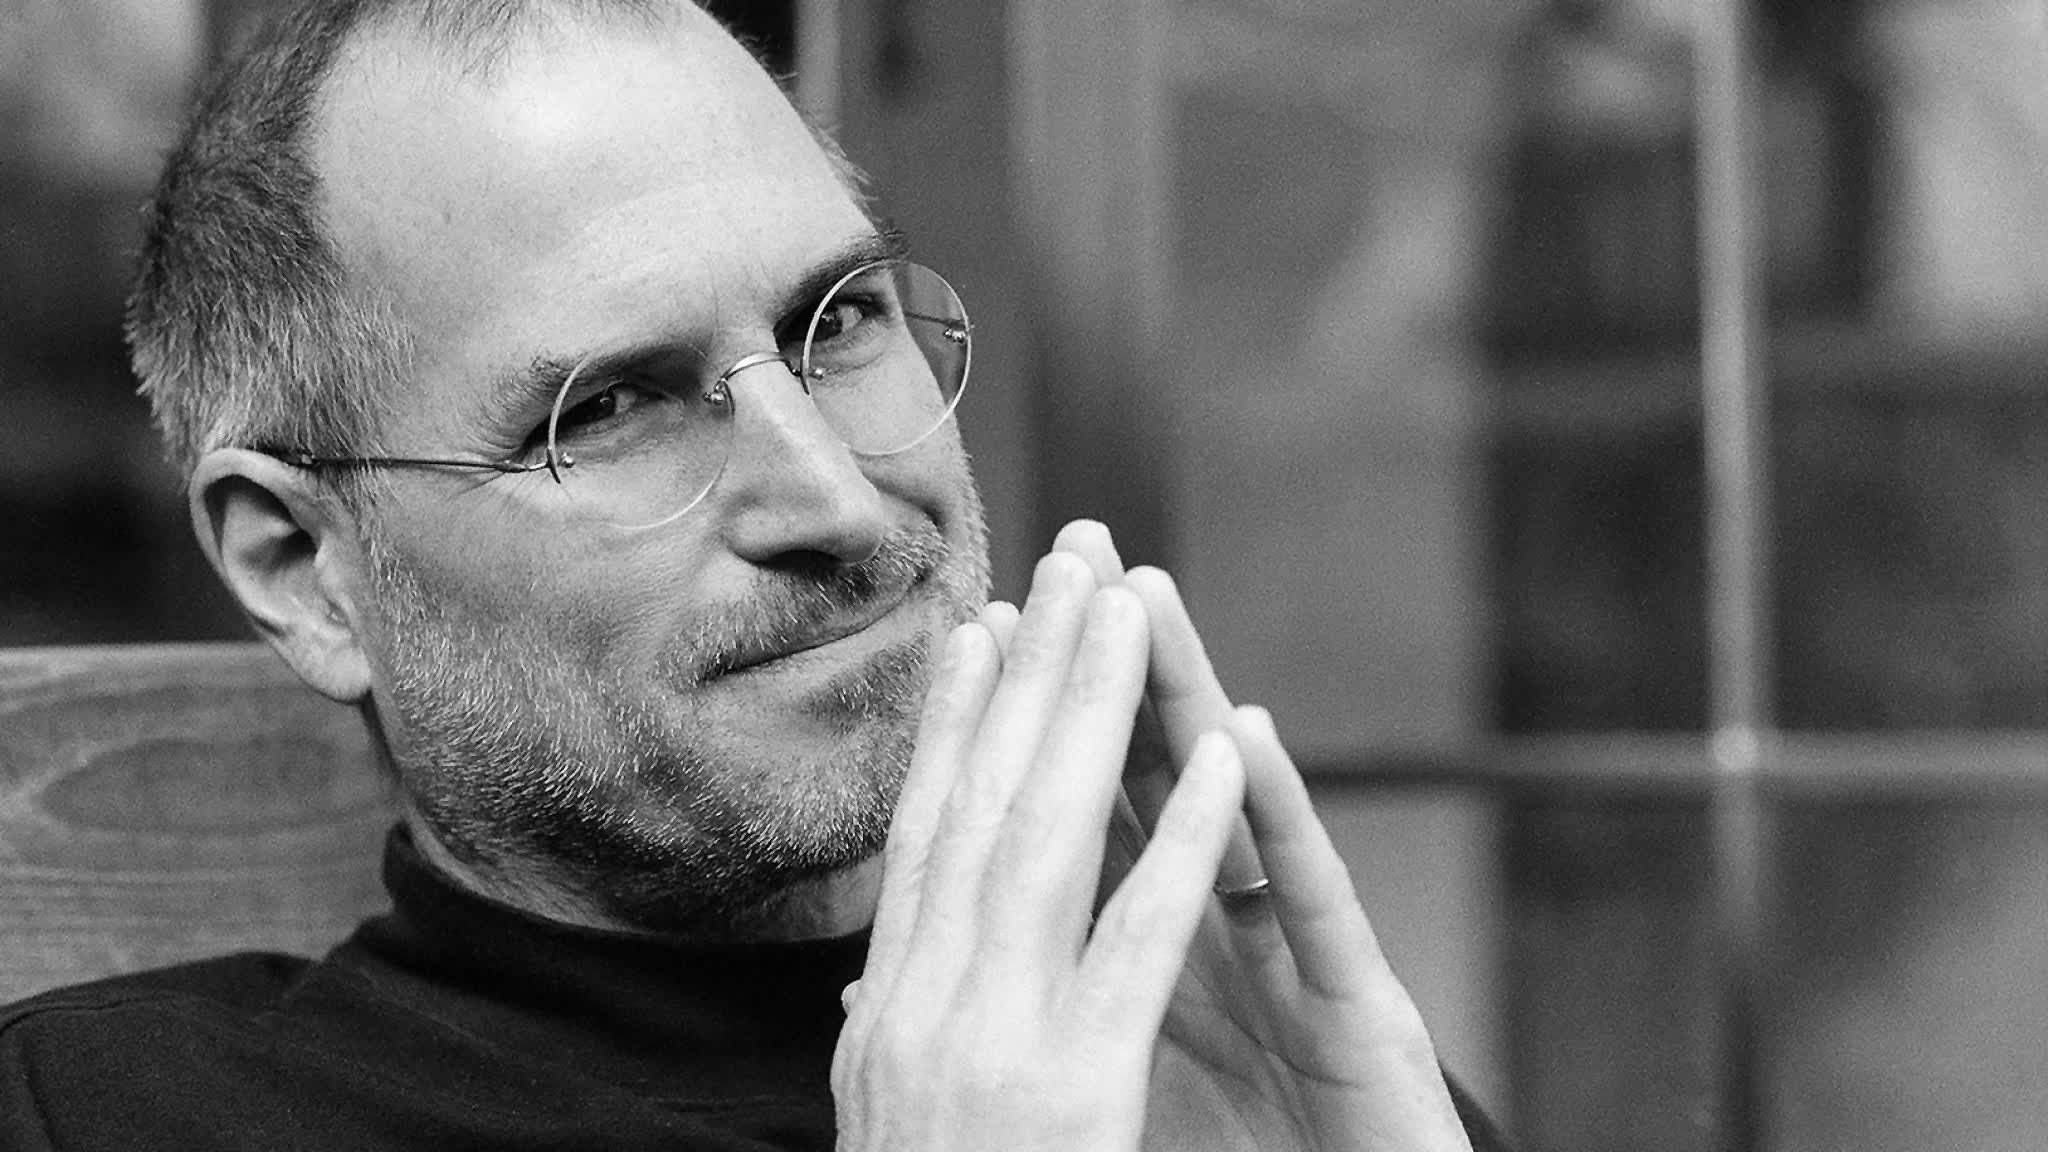 Steve Jobs to receive posthumous Medal of Freedom for his vision, imagination and creativity